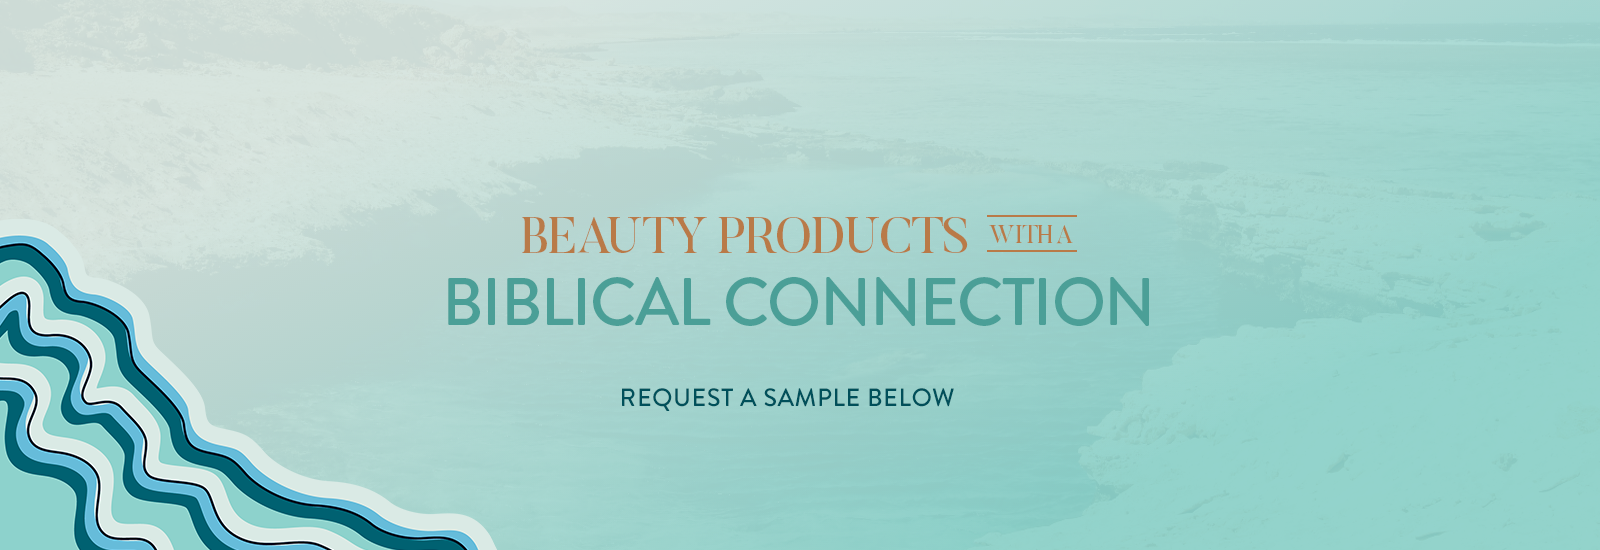 Beauty Products with a Biblical Connection